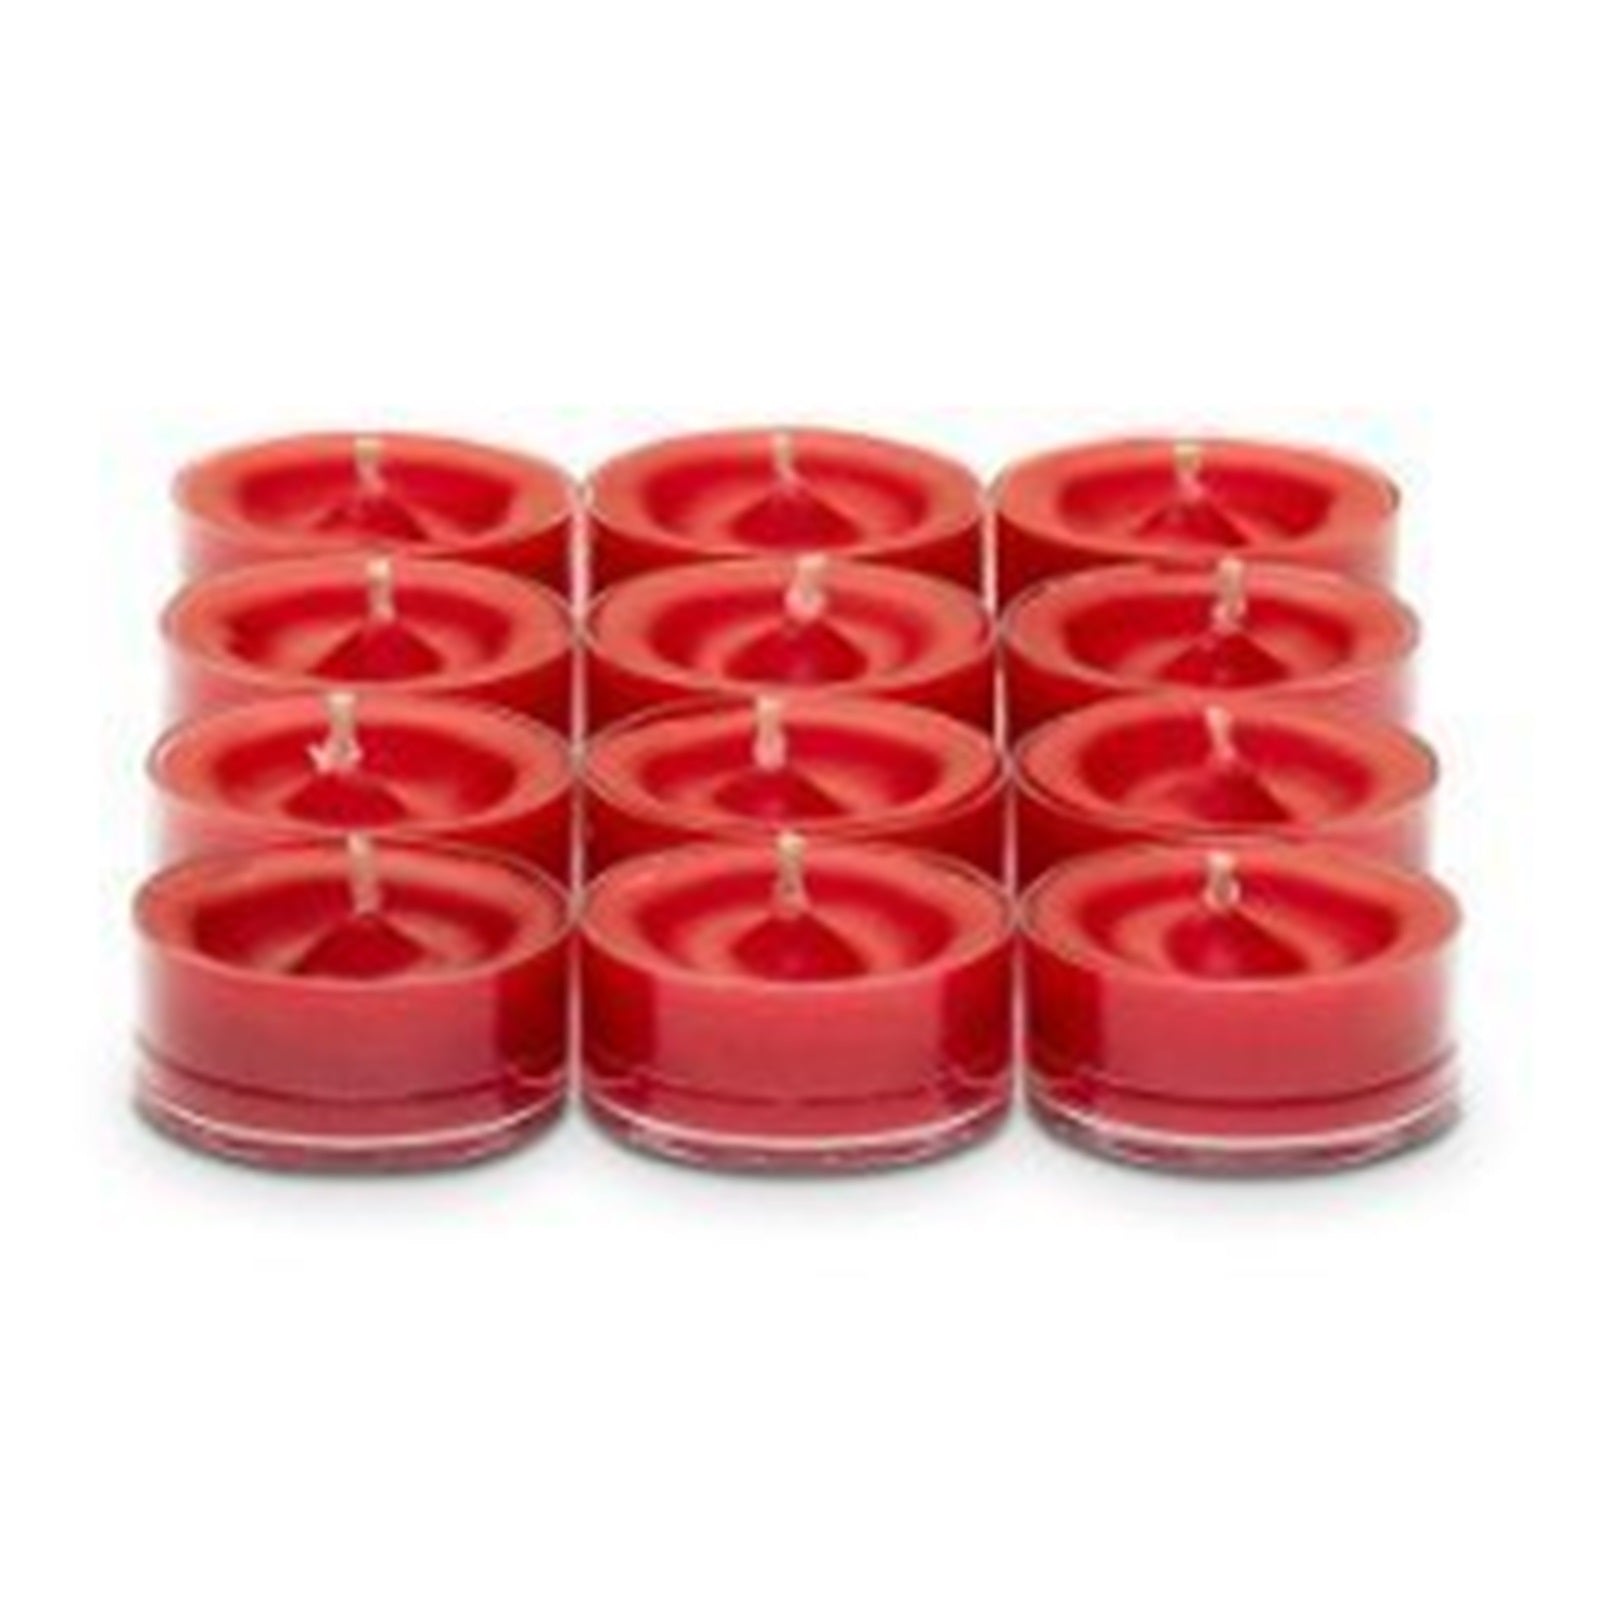 PartyLite Tealight Candles - 1 Box - 1 Dozen Tealights - 12 CANDLES CANDIED APPLES